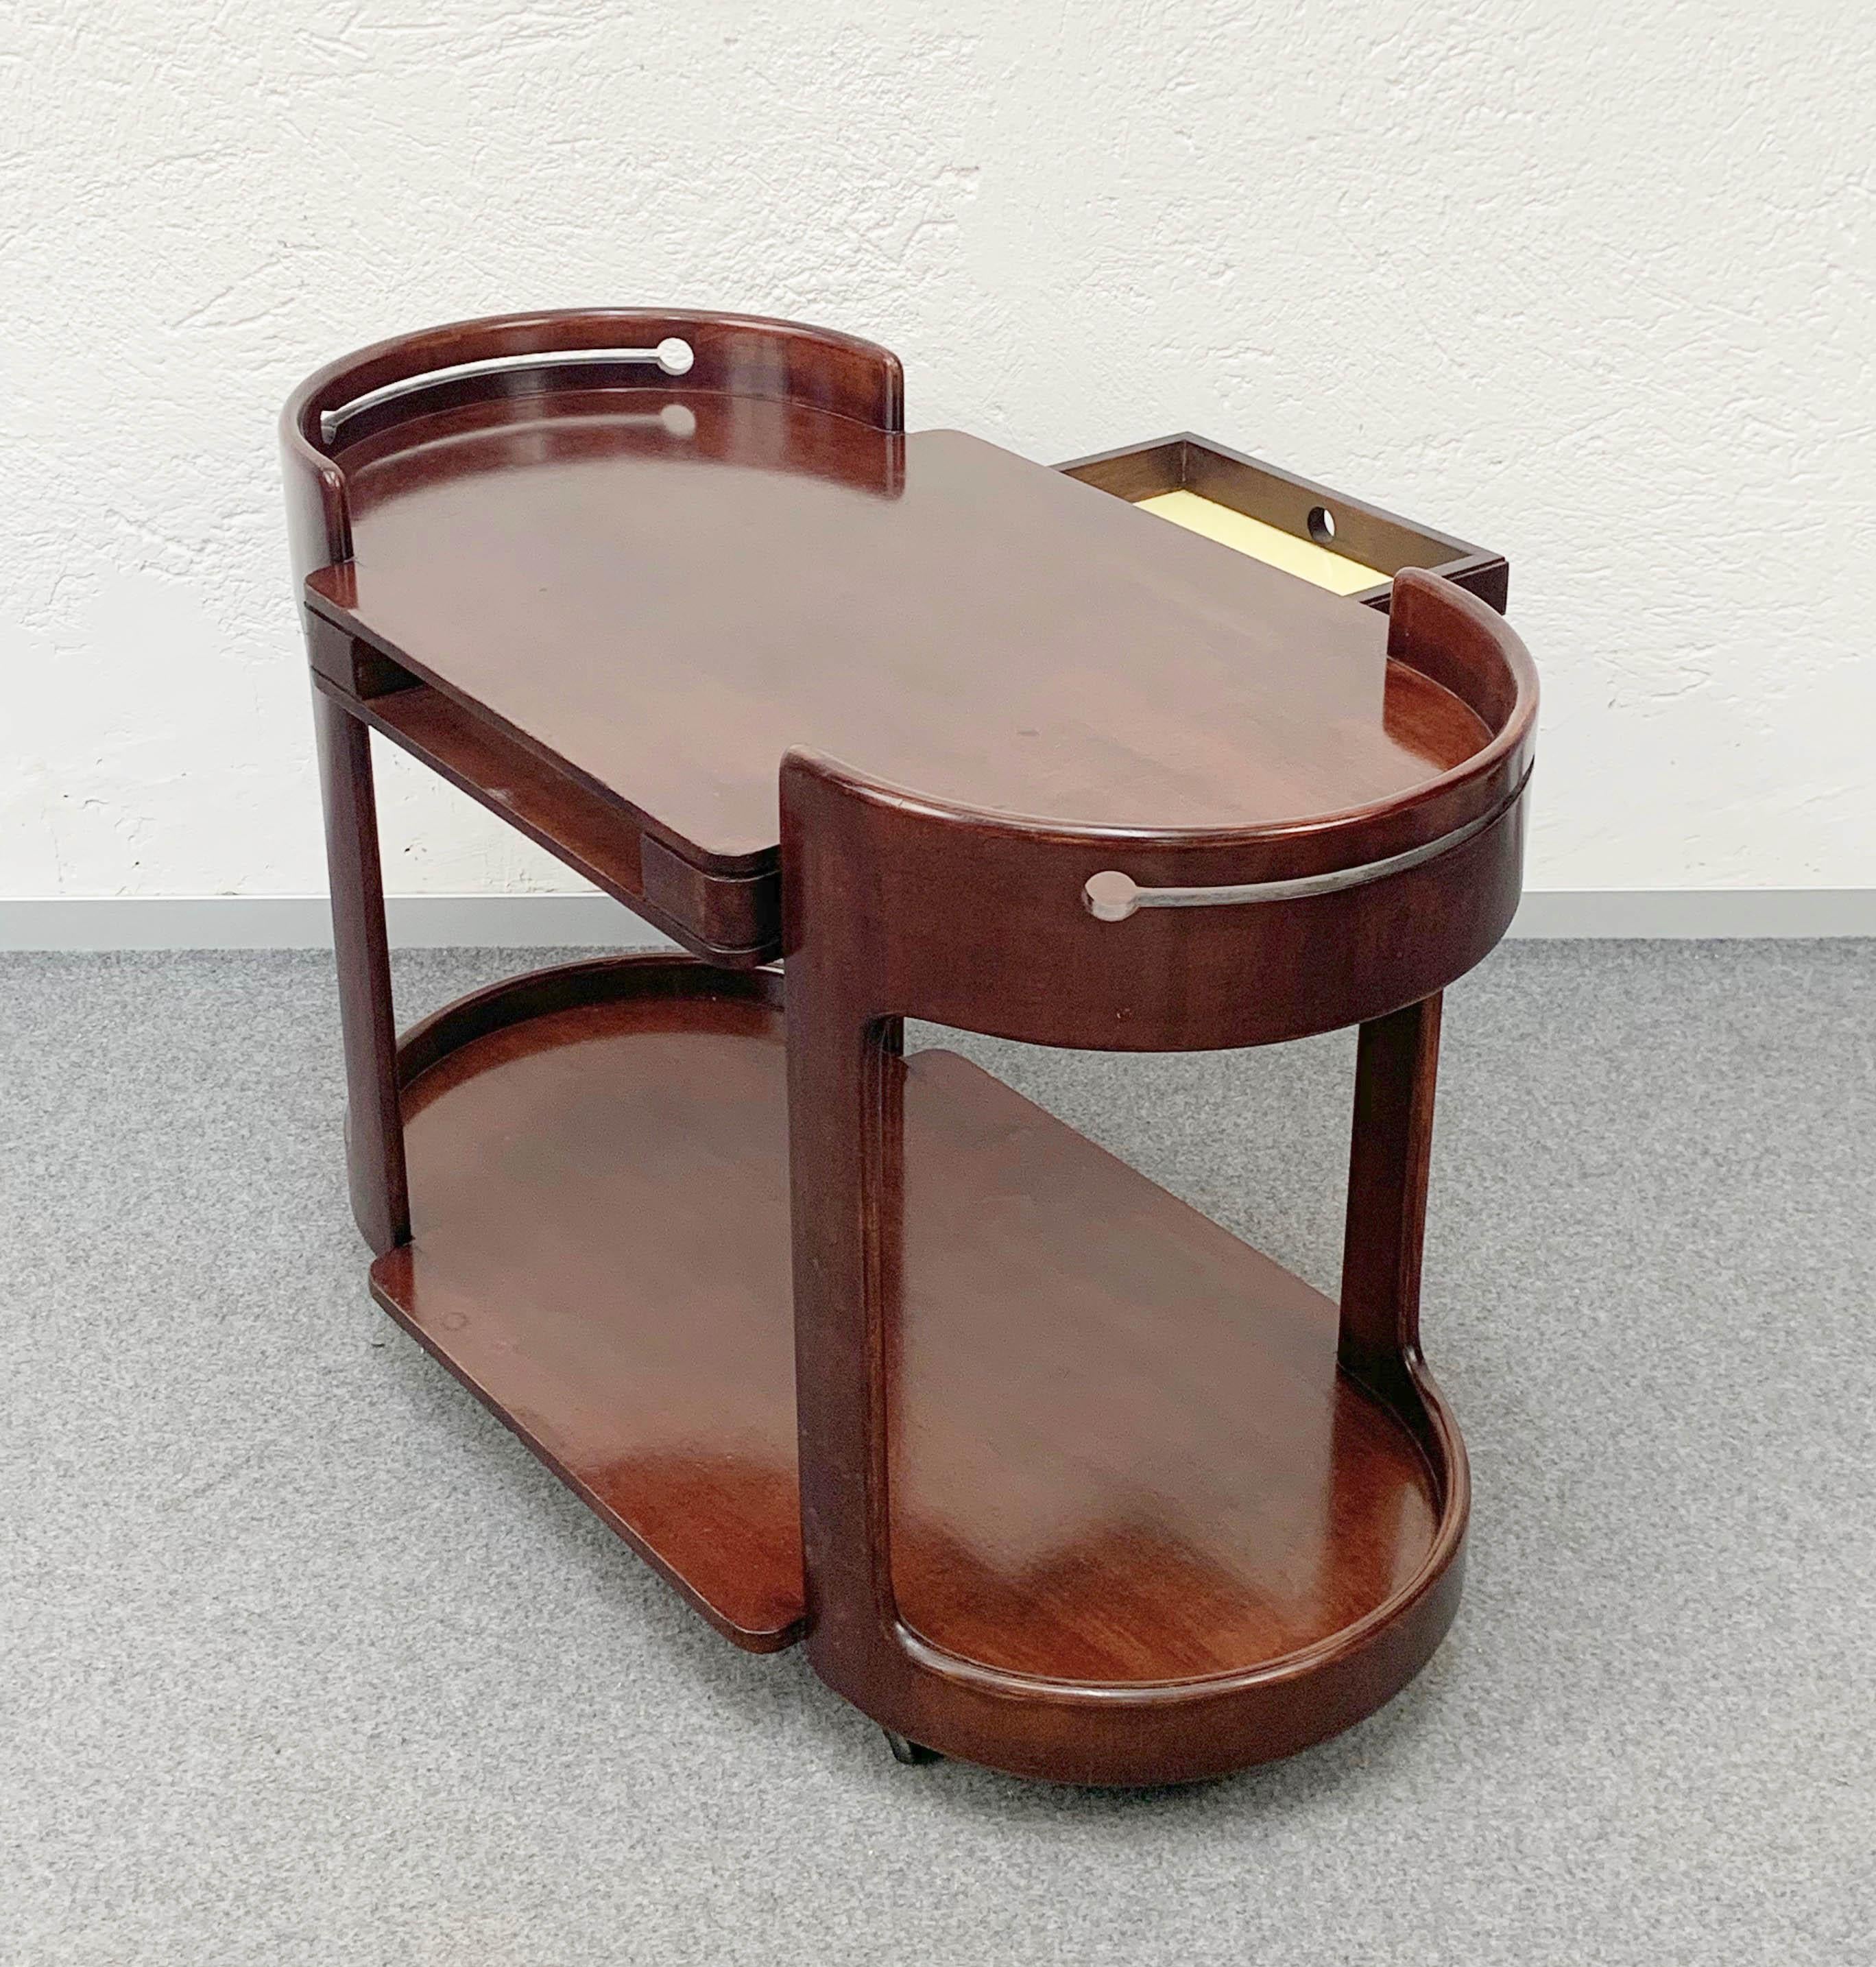 Elegant midcentury bar trolley after Afra and Tobia Scarpa in mahogany wood. The item was produced during 1970s in Italy and it is in marvellous conditions. 

It has a sliding drawer that can be opened from both sides and can be used as a tray.